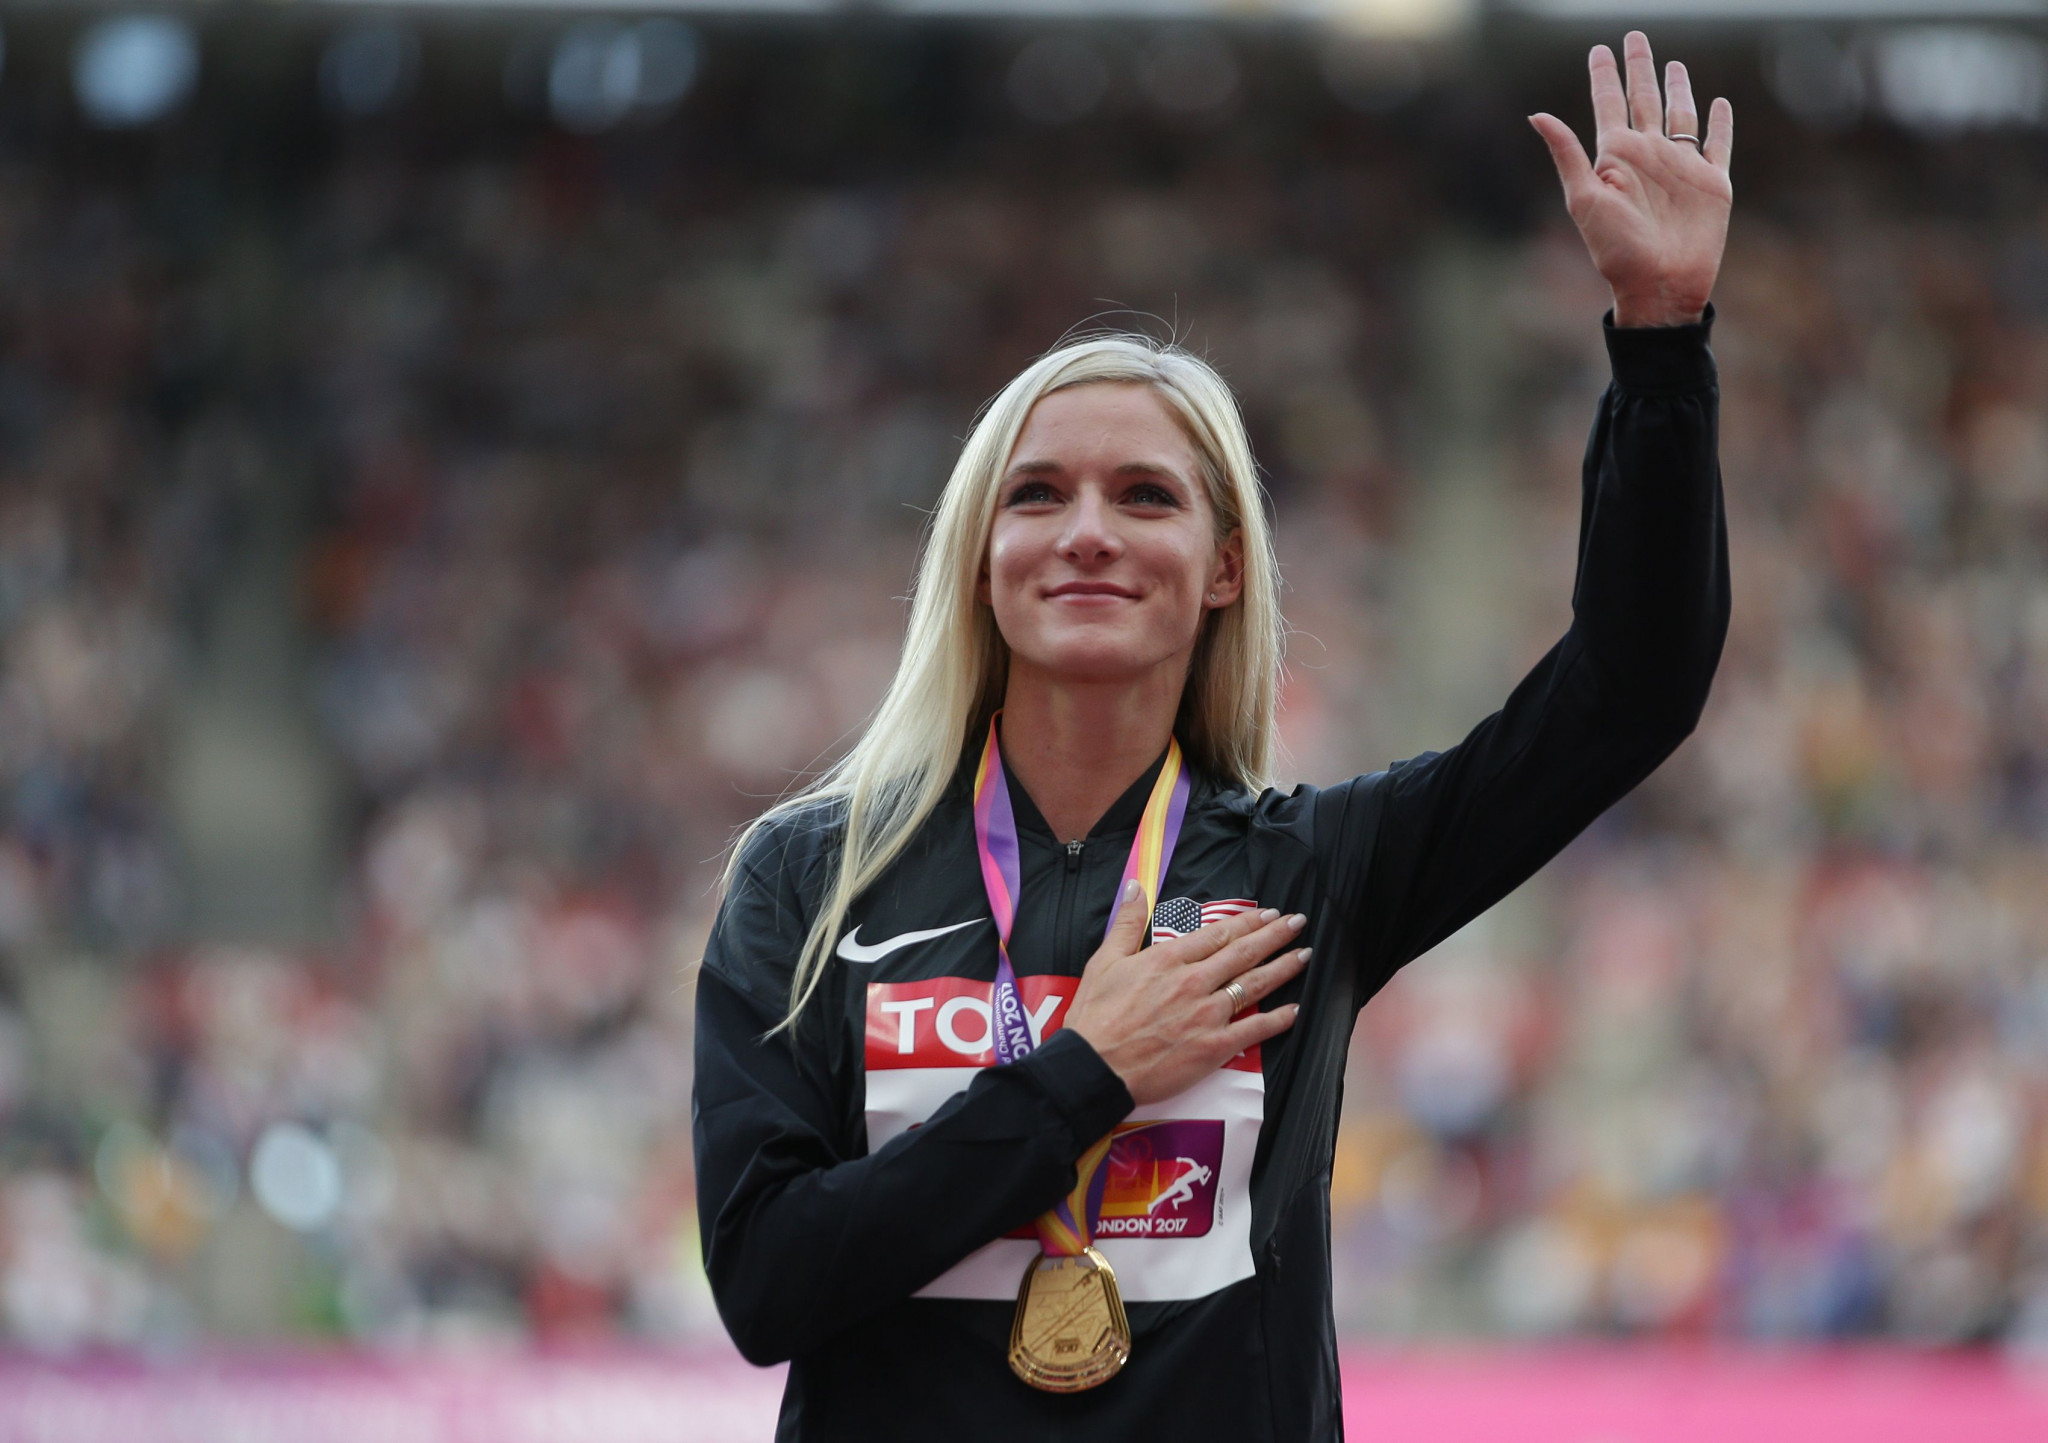 Steeplechase world champion becomes latest athlete to back Helleland for WADA Presidency as calls for significant reform